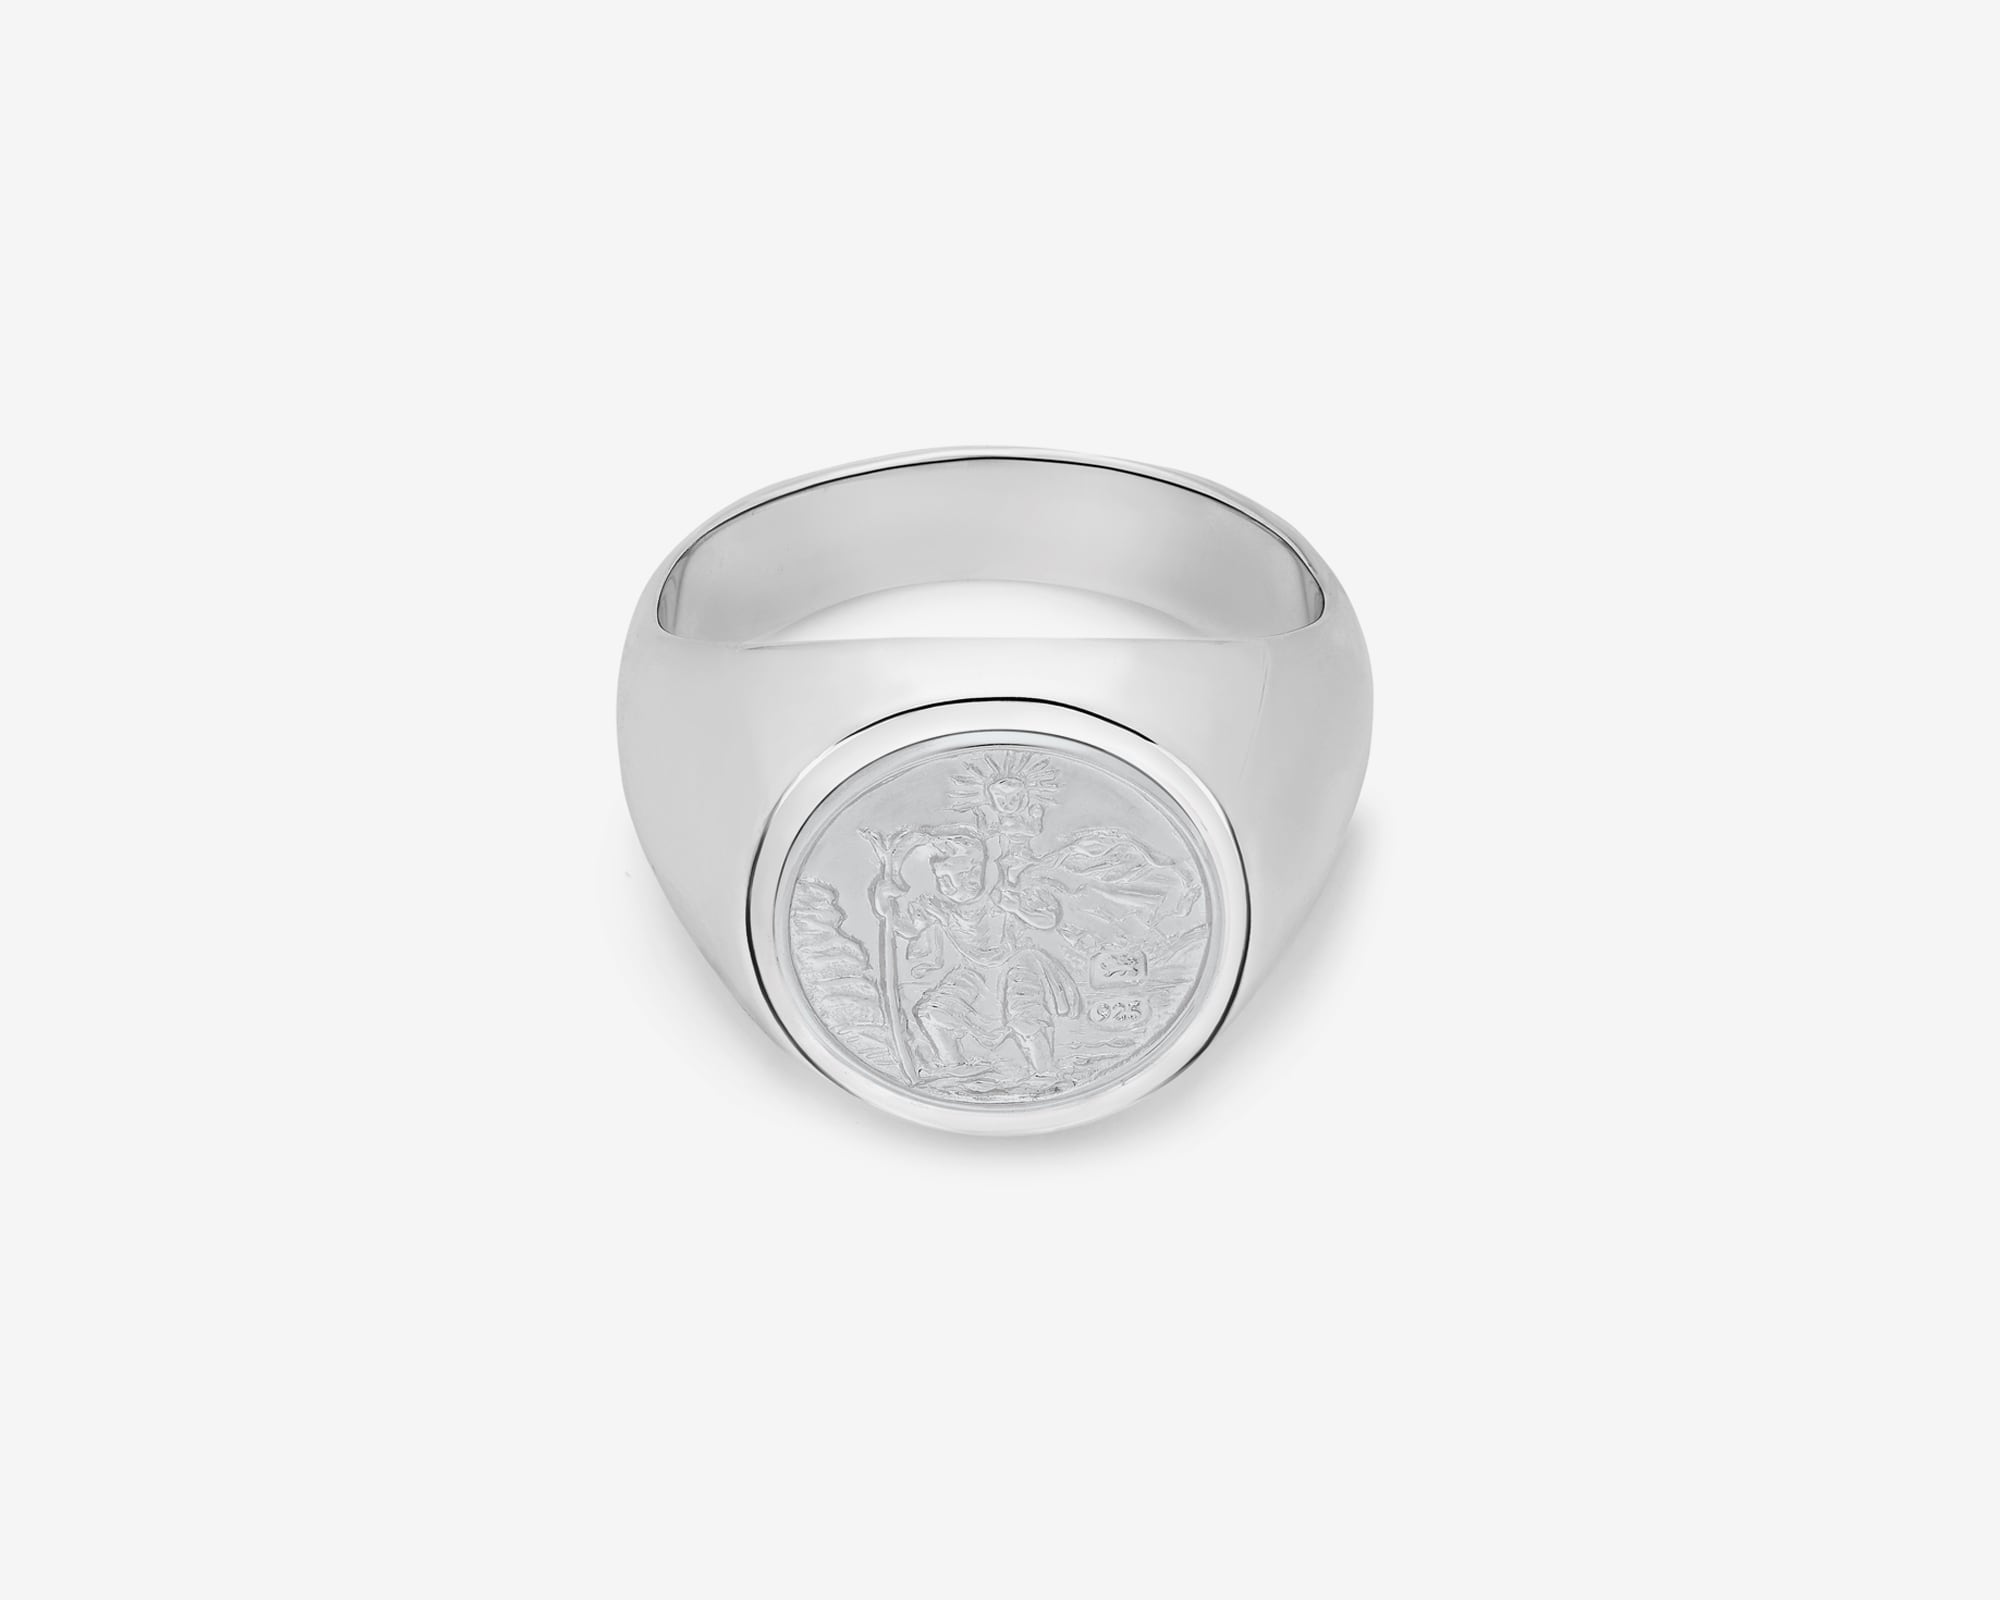 SSSIGRNG – St Christopher Signet Ring – JT Inman Co.